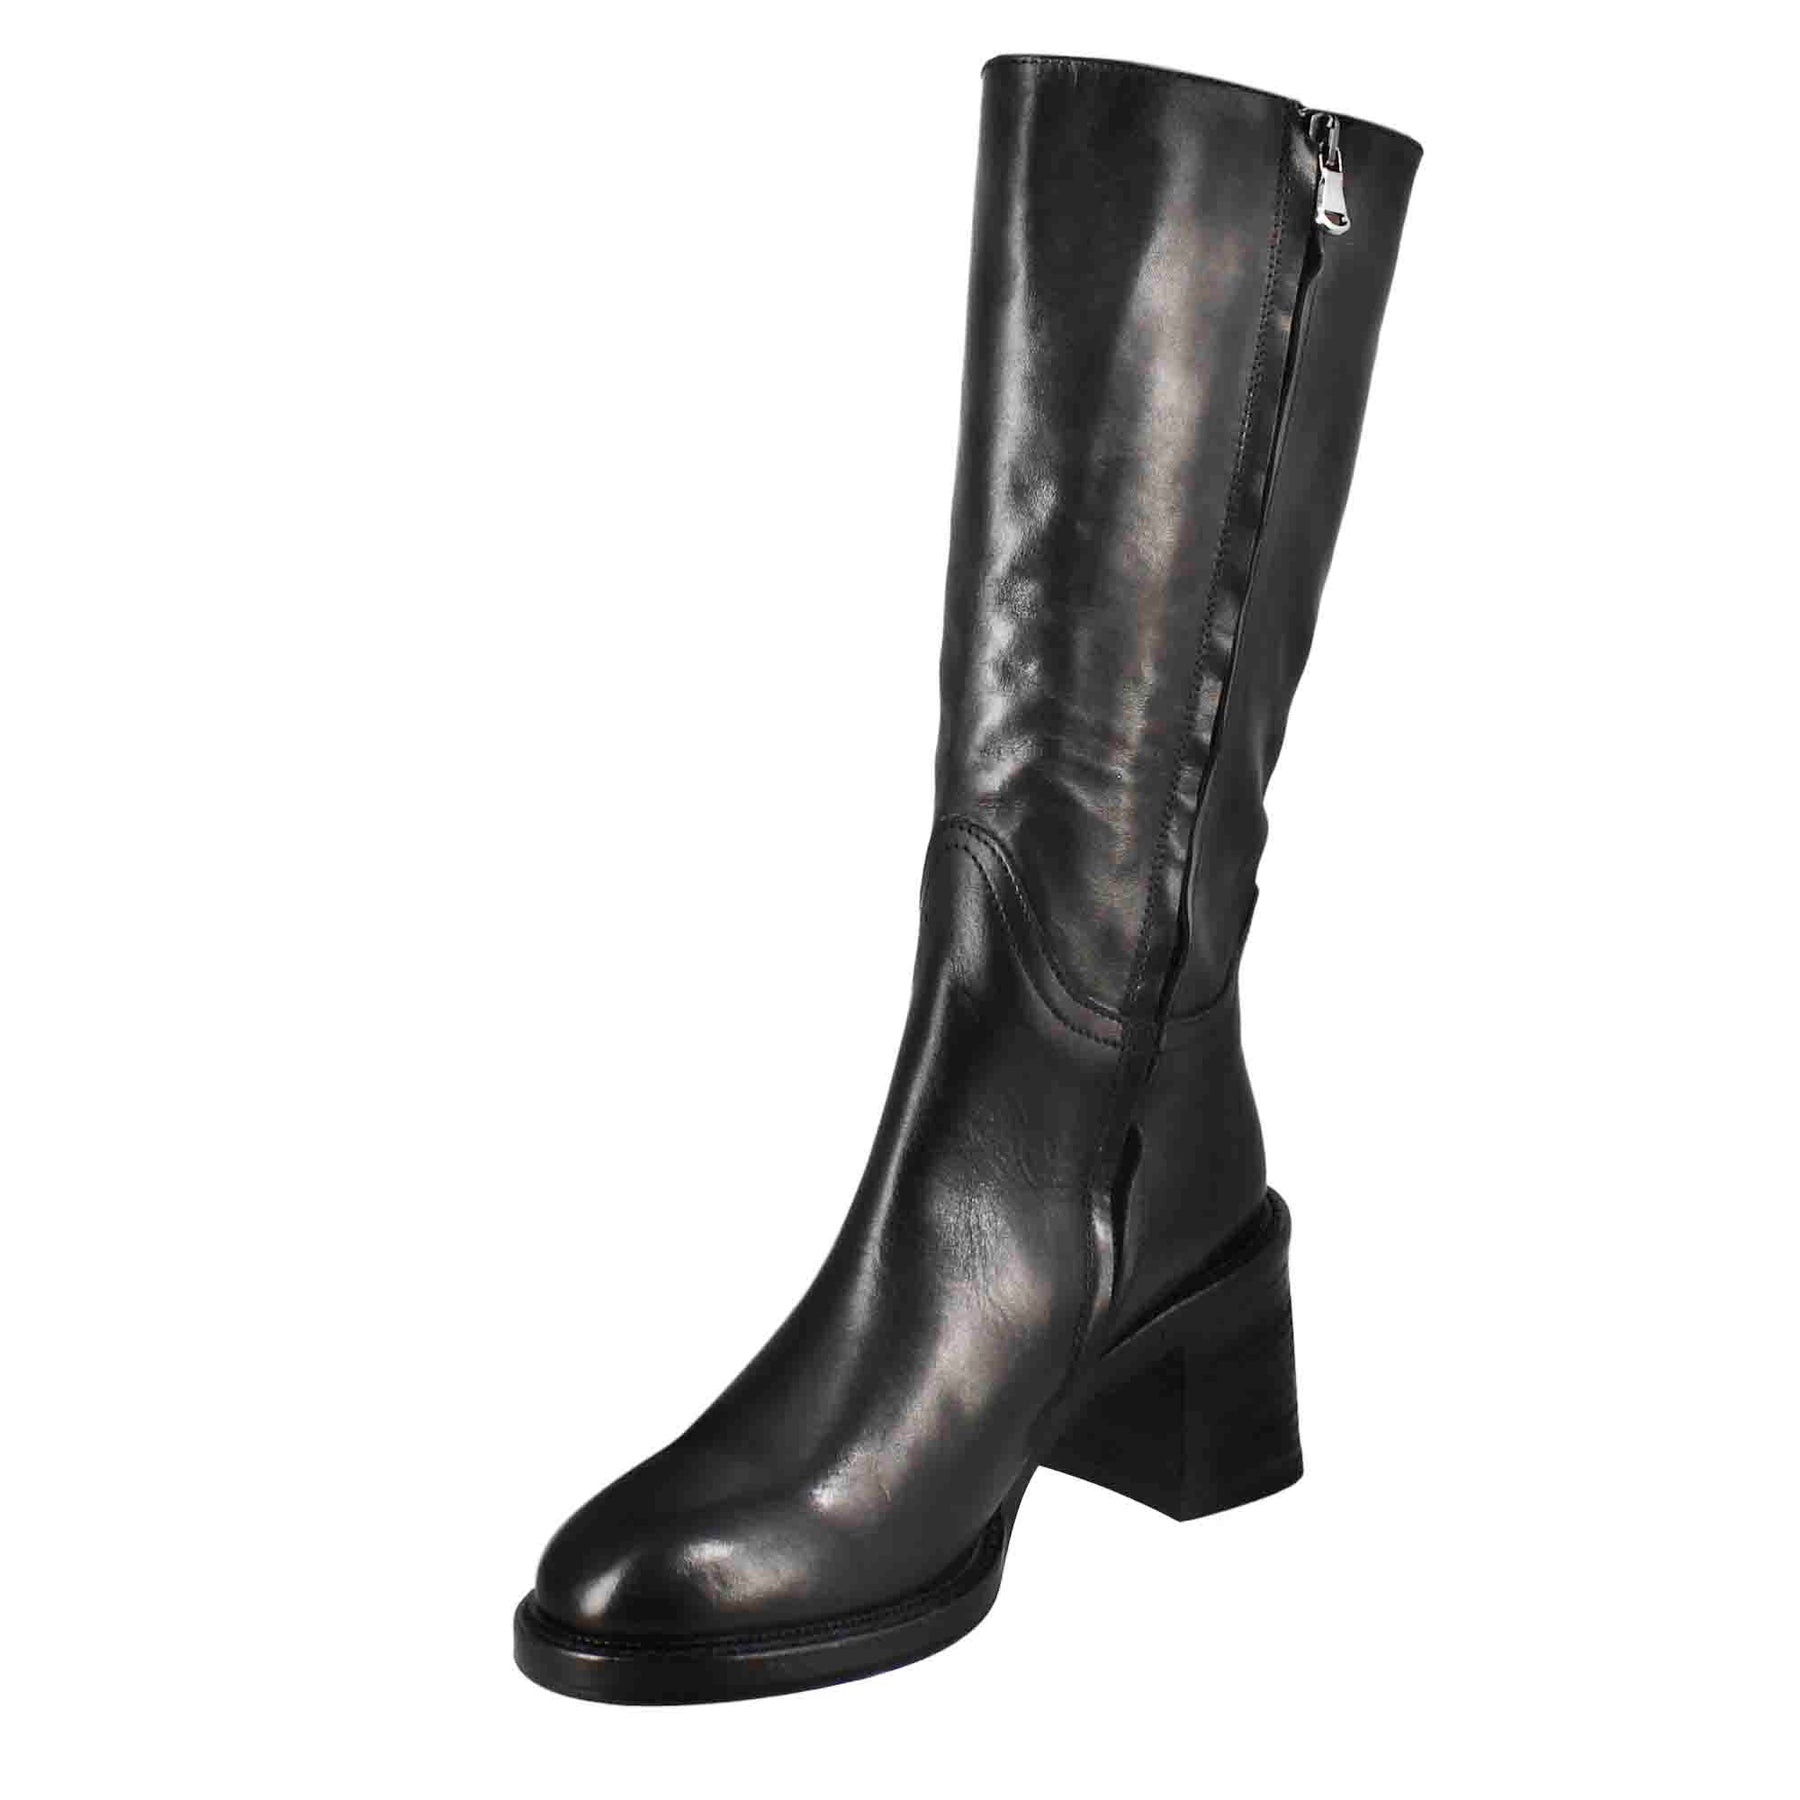 Women's calf-high diver boot with heel in black washed leather